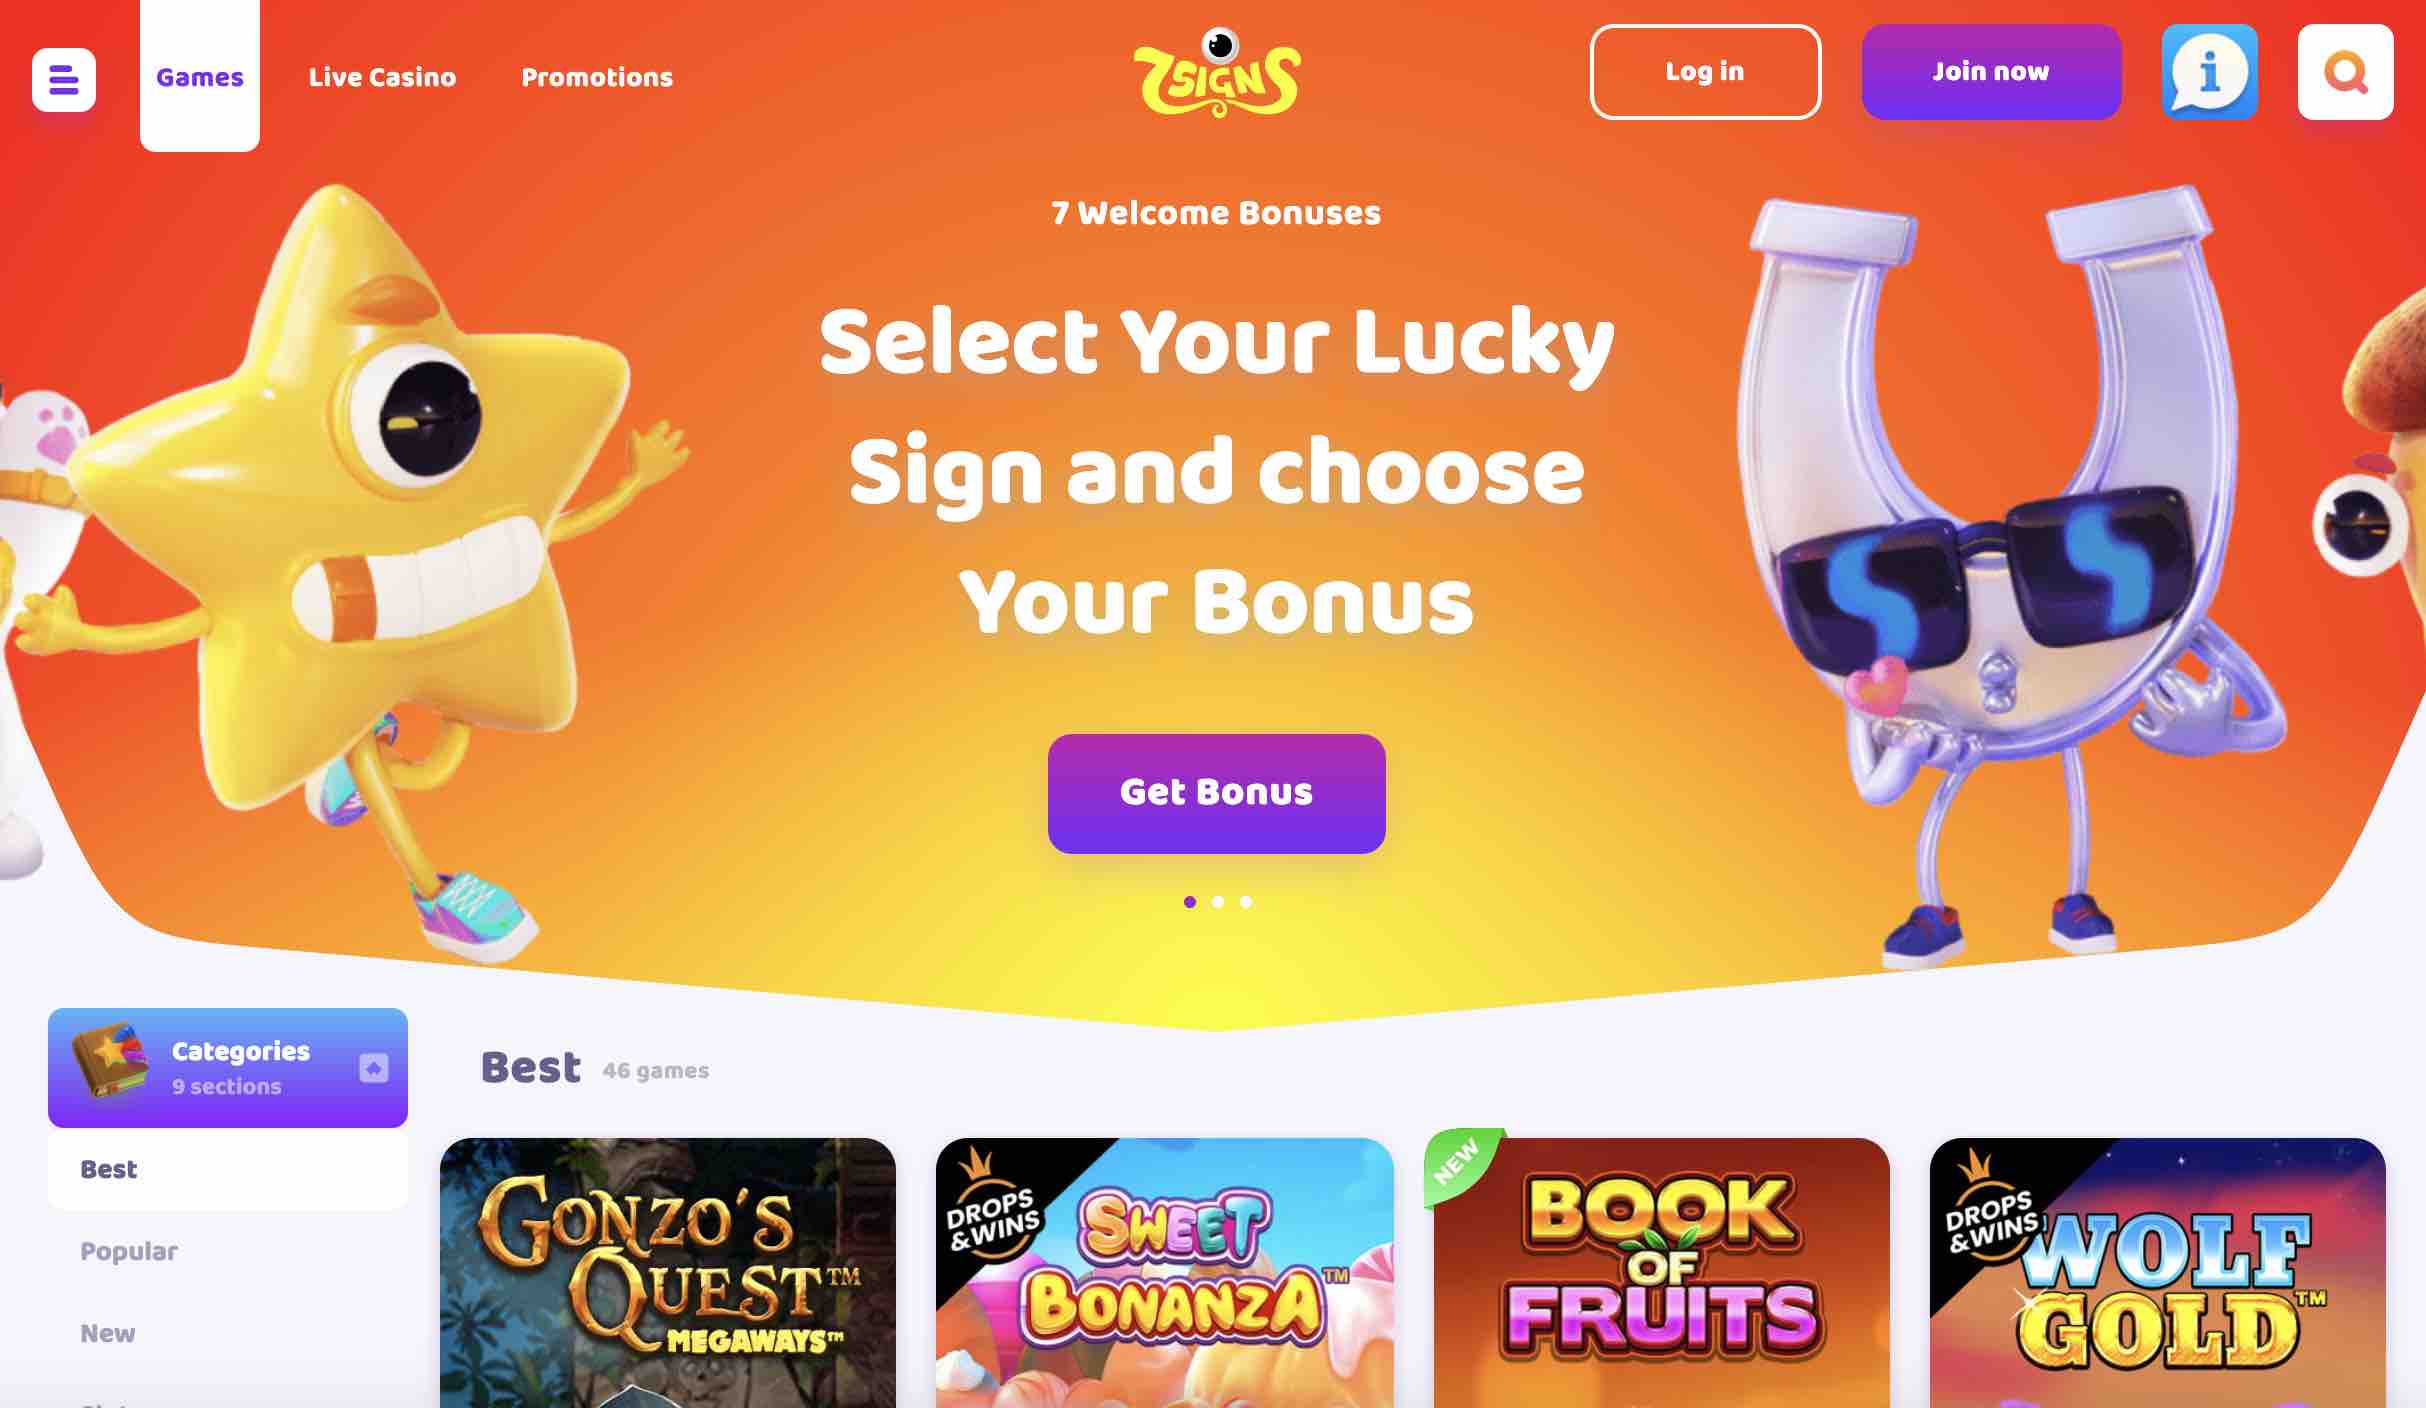 Discover Great Games and Bonuses at 7Signs Casino